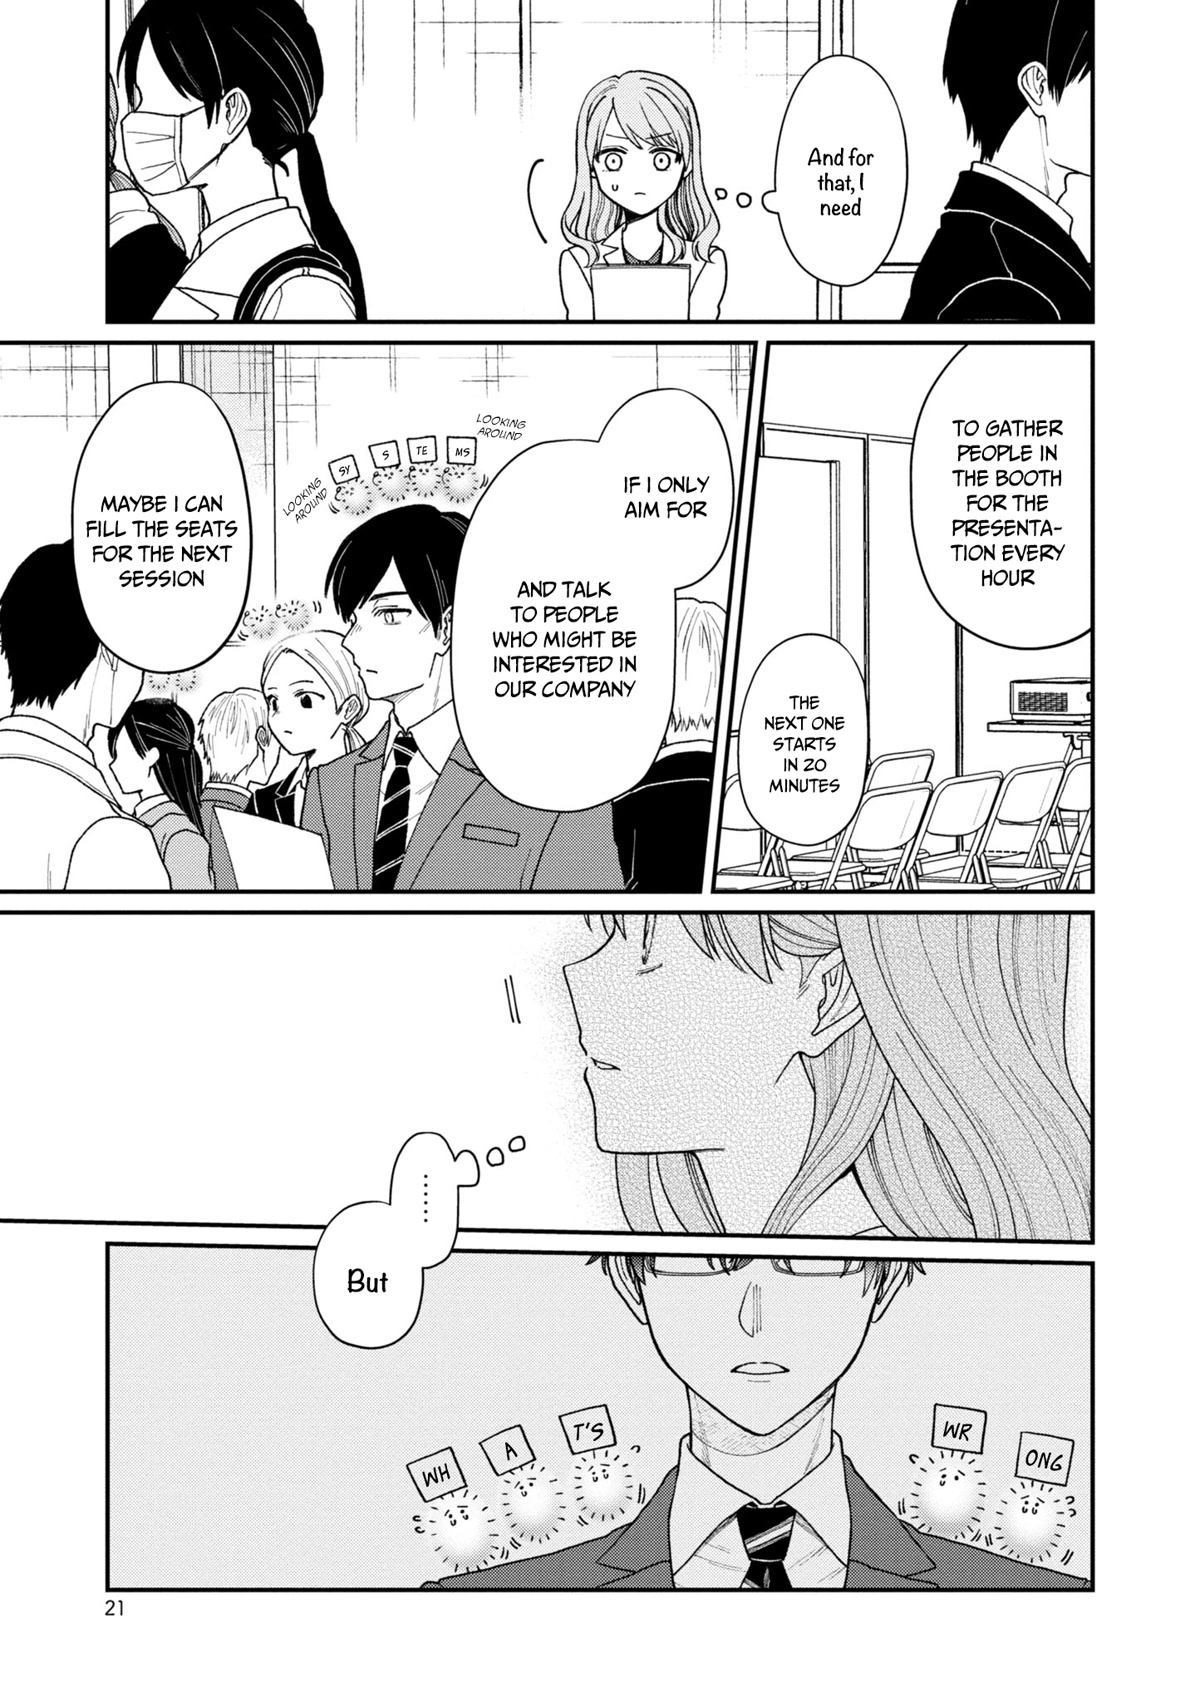 The New-Hire Who Could "Read" Emotions and the Unsociable Senpai - chapter 19 - #4